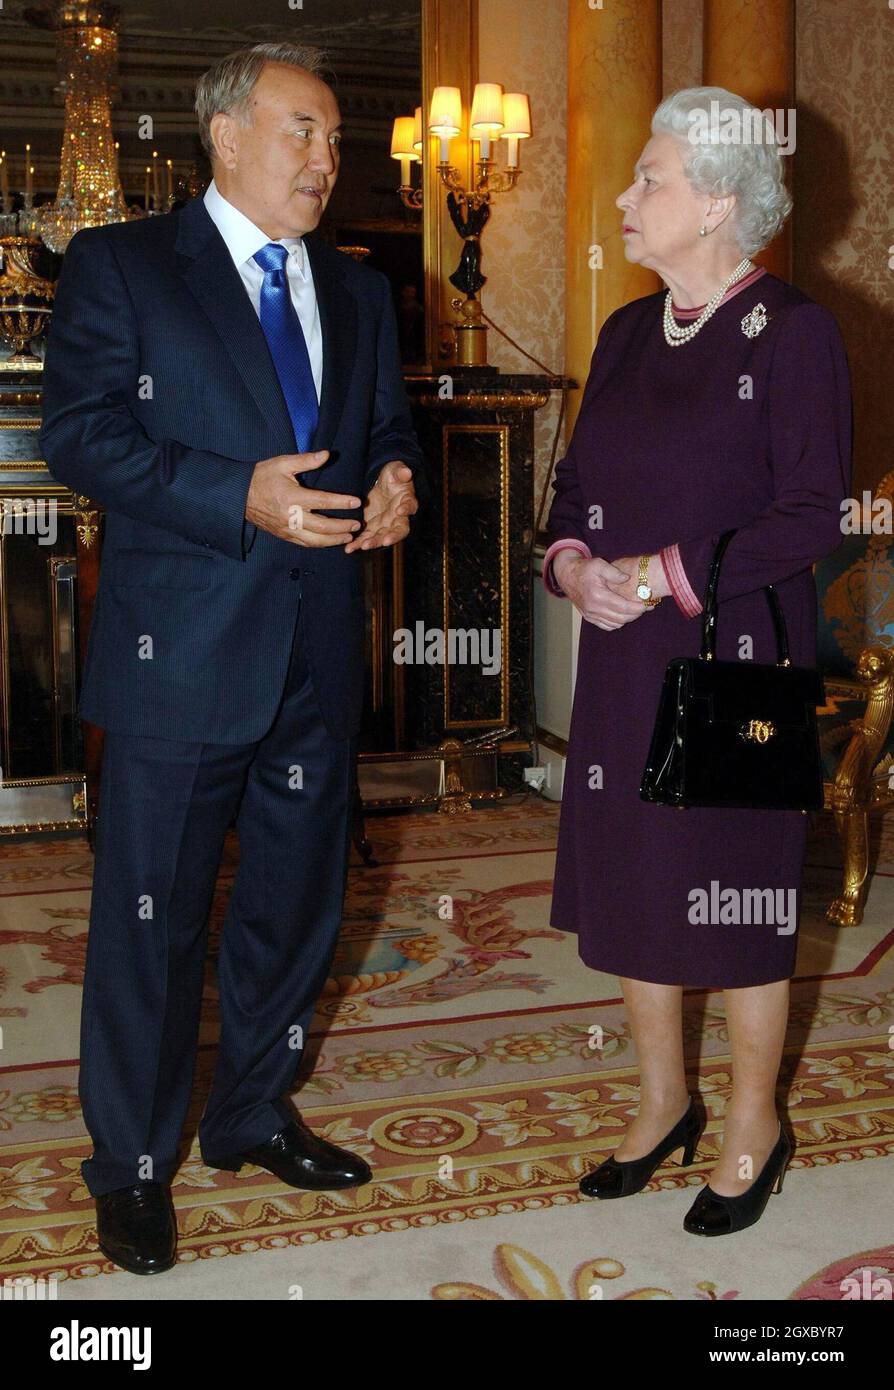 Queen Elizabeth II meets the President of the Republic of Kazakhstan, Mr Nursultan Nazarbayev, at Buckingham Palace in London on November 21, 2006. The President had laughed off insults to his country by the fictional TV reporter Borat - alter ego of comic Sacha Baron Cohen. Anwar Hussein/EMPICS Entertainment Stock Photo